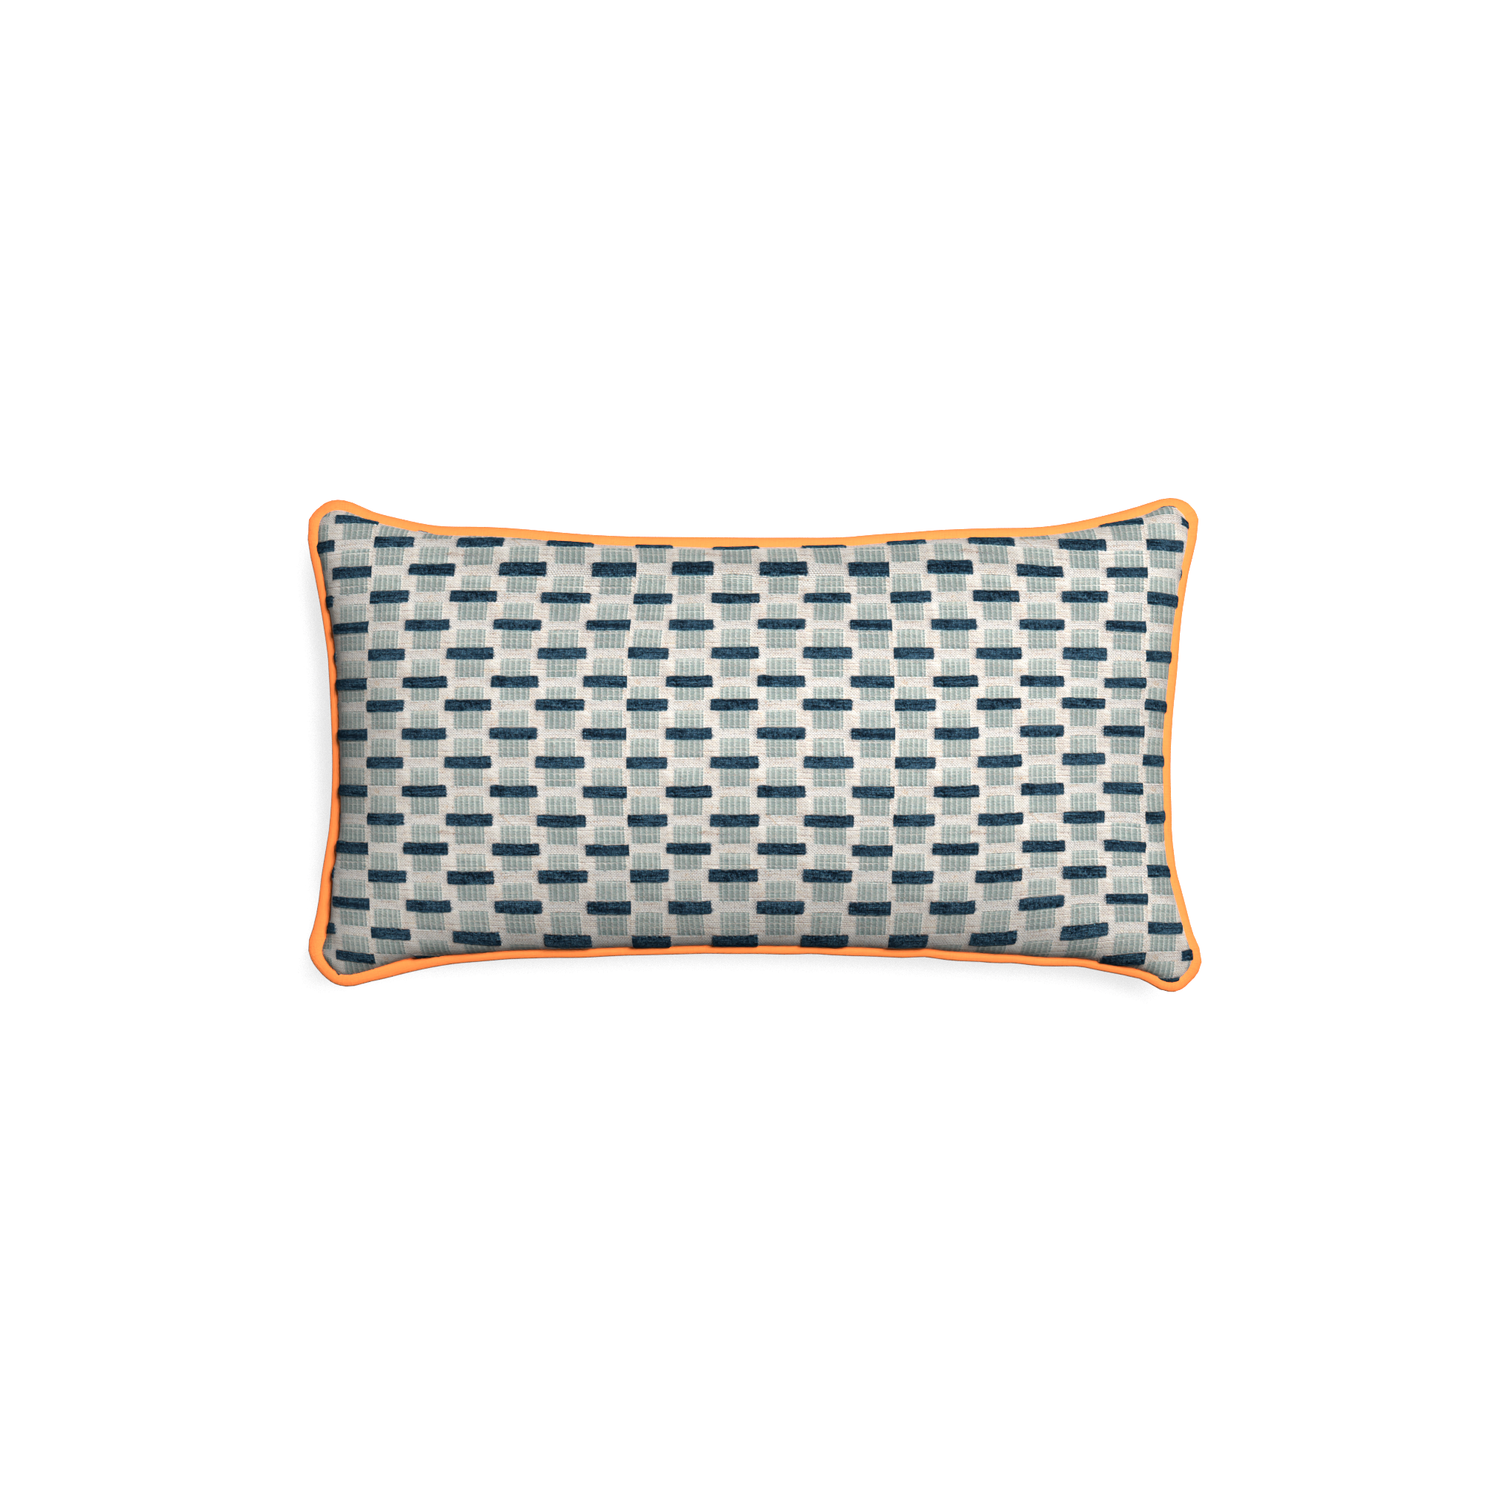 Petite-lumbar willow amalfi custom blue geometric chenillepillow with clementine piping on white background